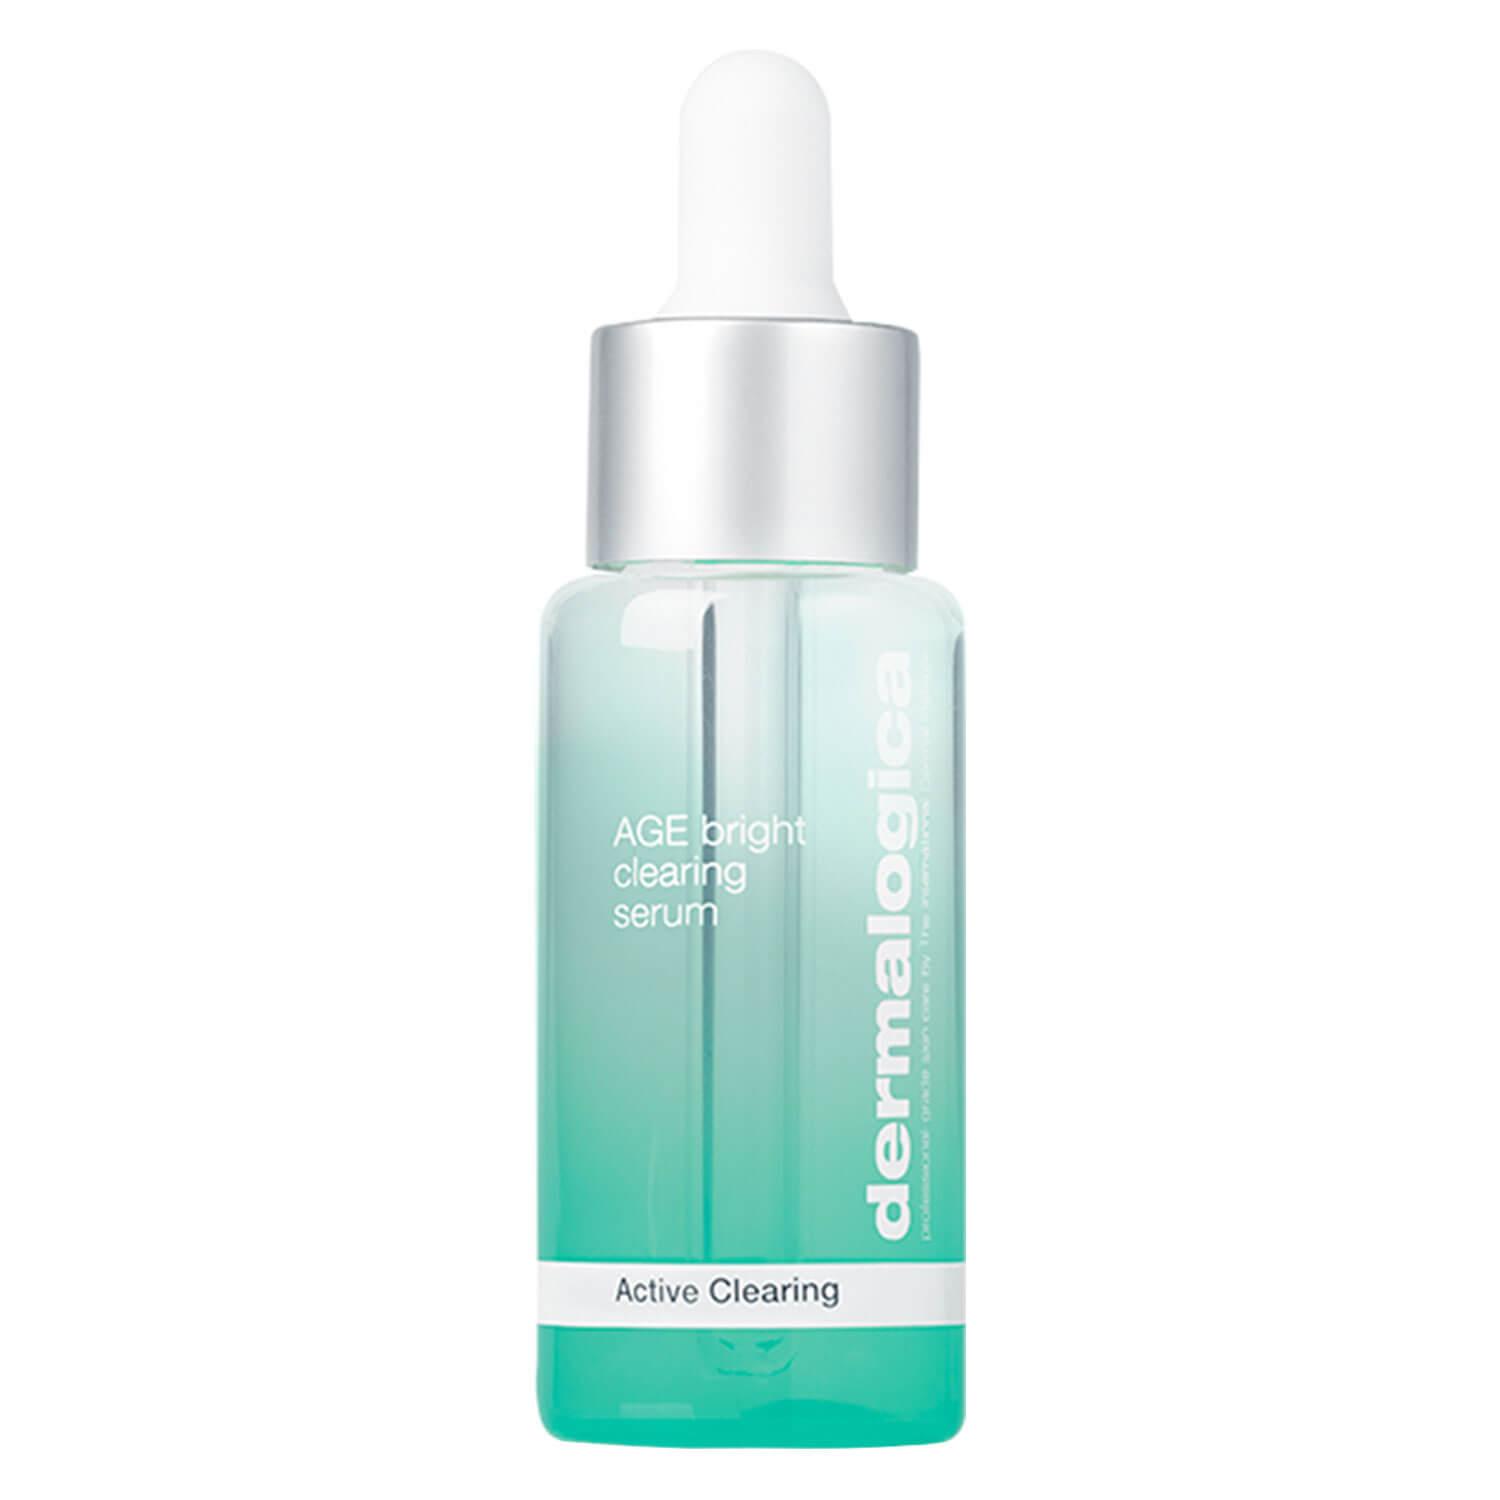 Active Clearing - AGE Bright Clearing Serum